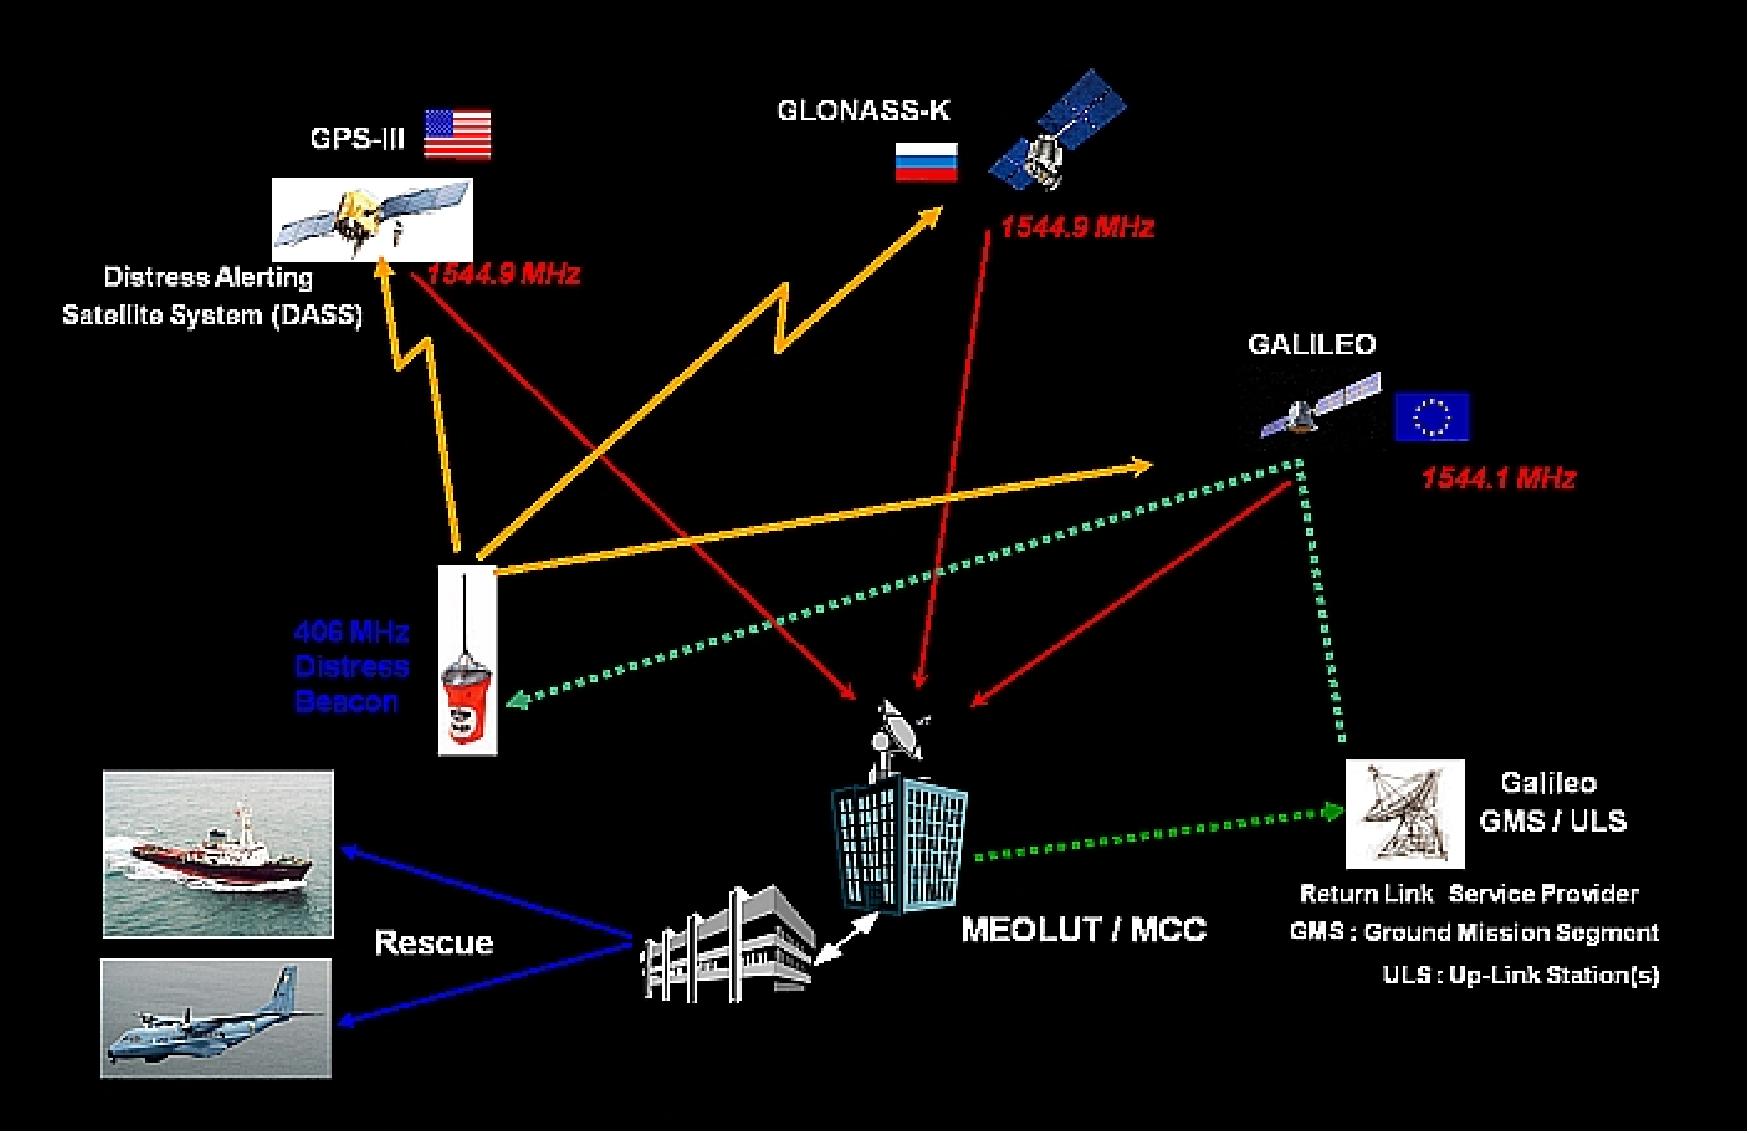 Figure 24: Overview of the MEOSAR system concept within GNSS (image credit: ISU Symposium 2010, Strasbourg, Ref. 7)